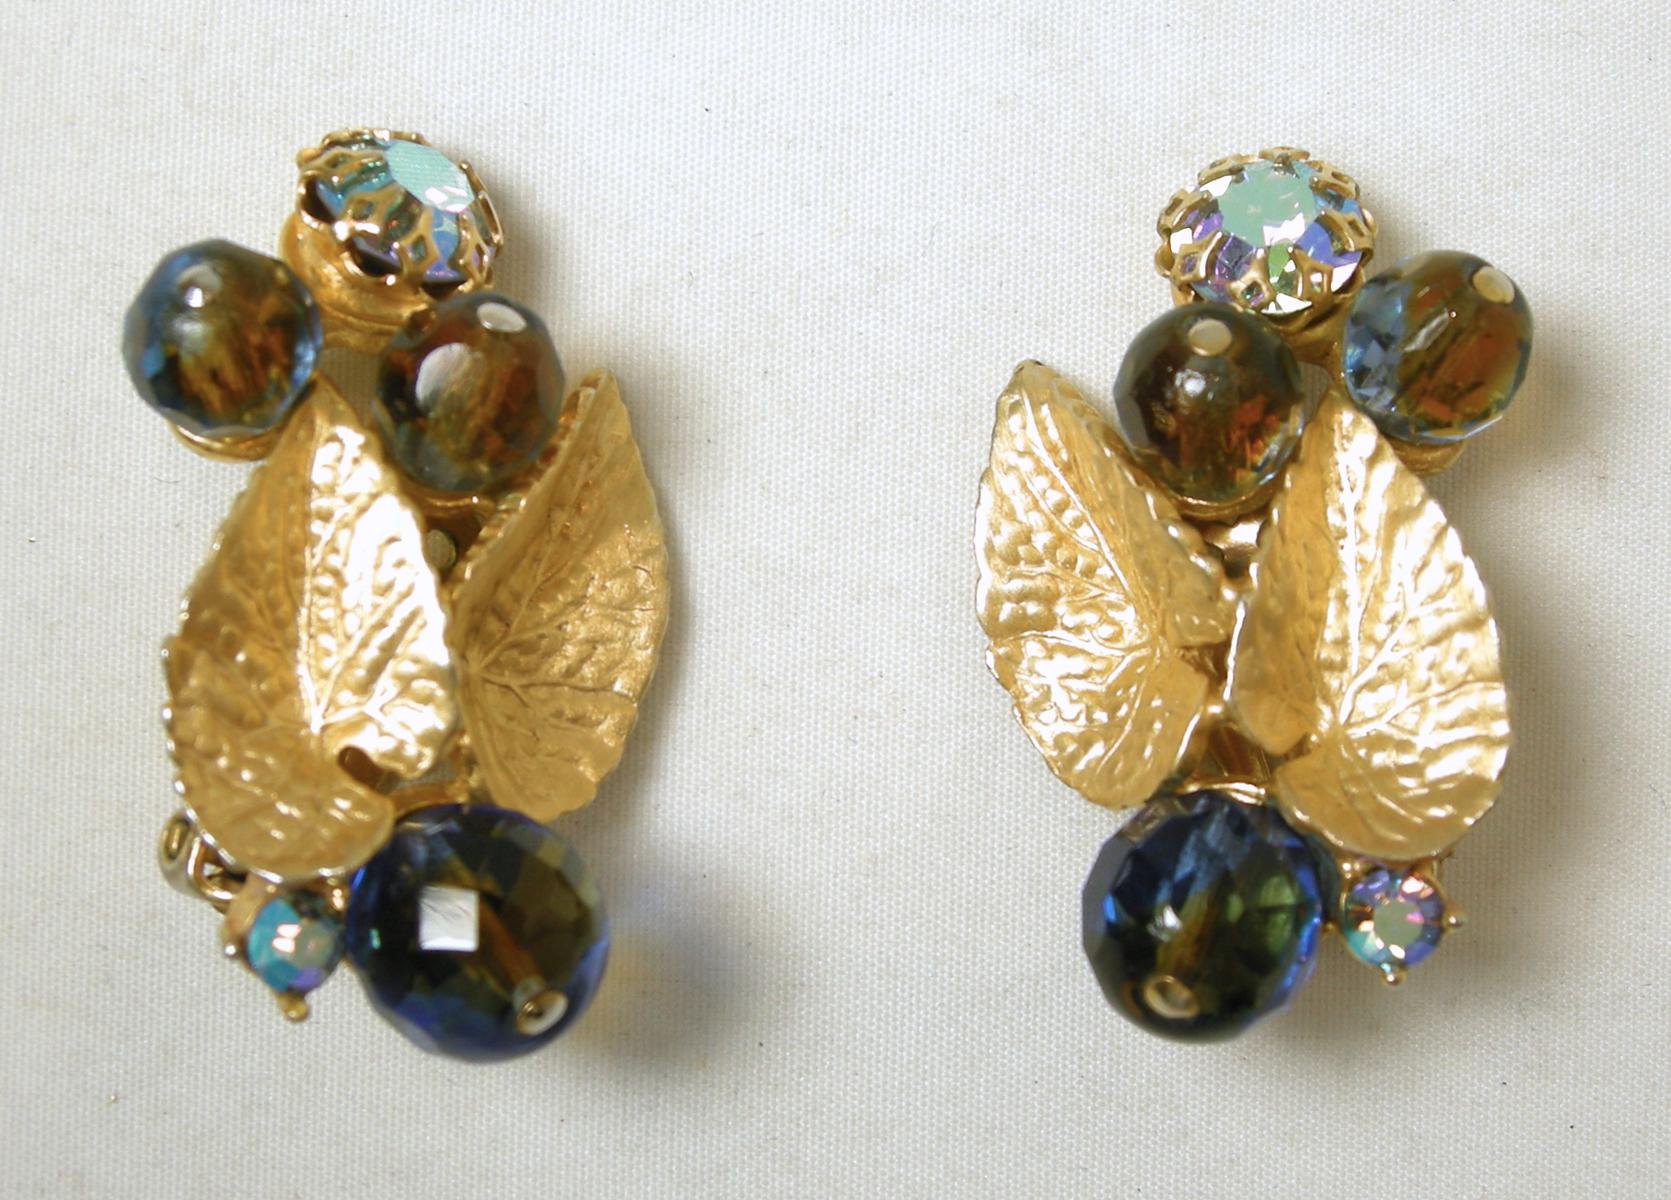 These vintage signed Schiaparelli earrings have gold tone leaves with multi-color Aura Borealis stones streaming out on both ends.  In excellent condition, these clip earrings measure 1-1/2” x 1” and are signed “Schiaparelli”.